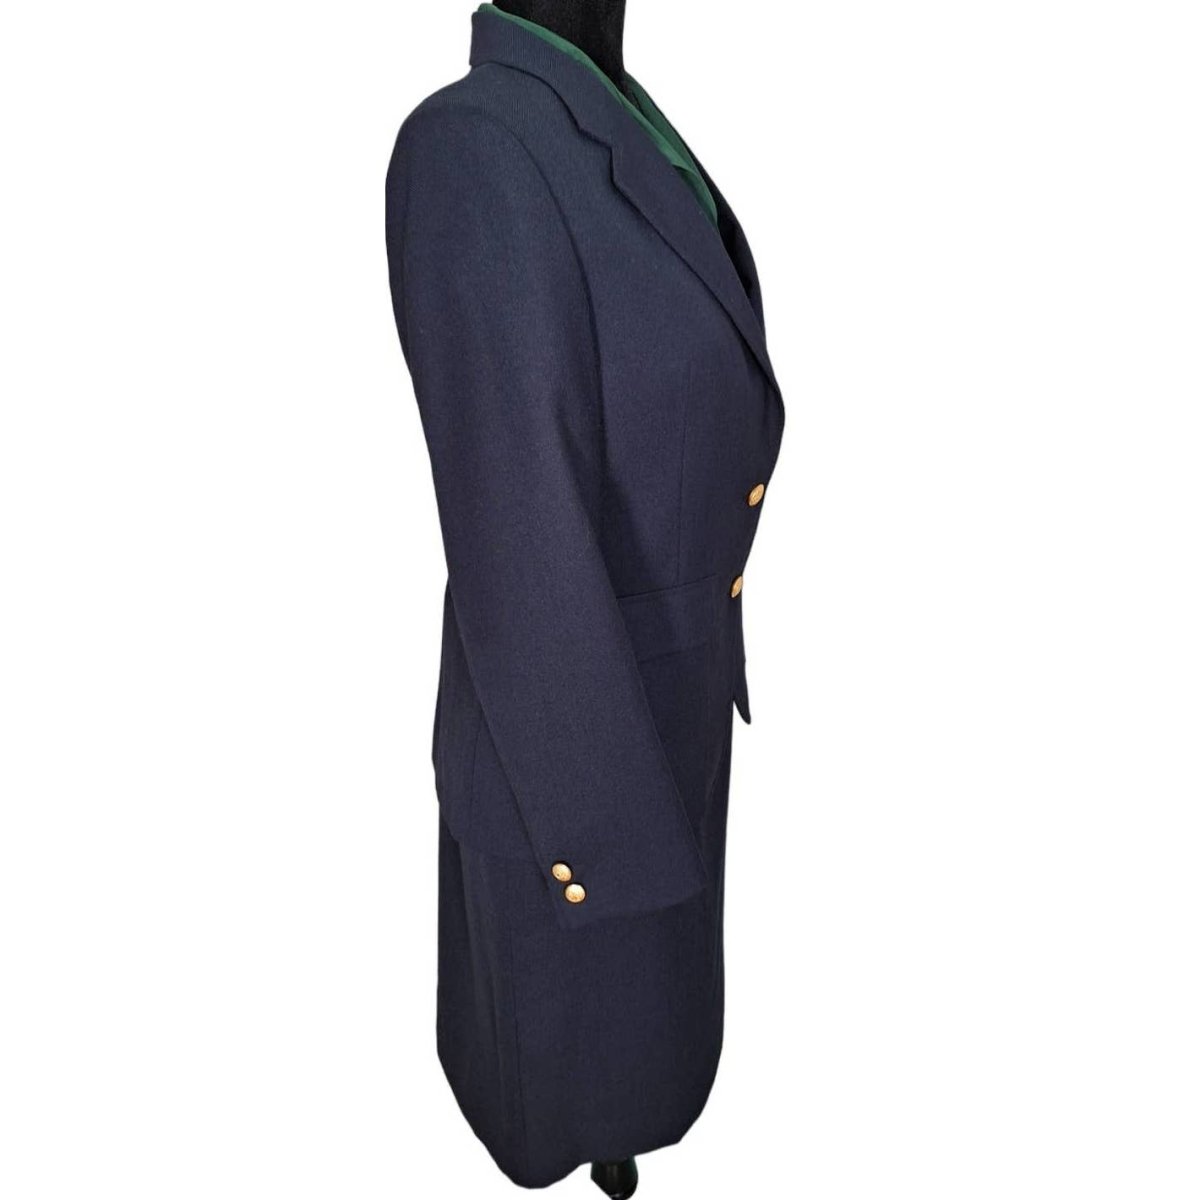 70s/80s Navy Blue Gold Button Skirt Suit Size 4/6 - themallvintage The Mall Vintage